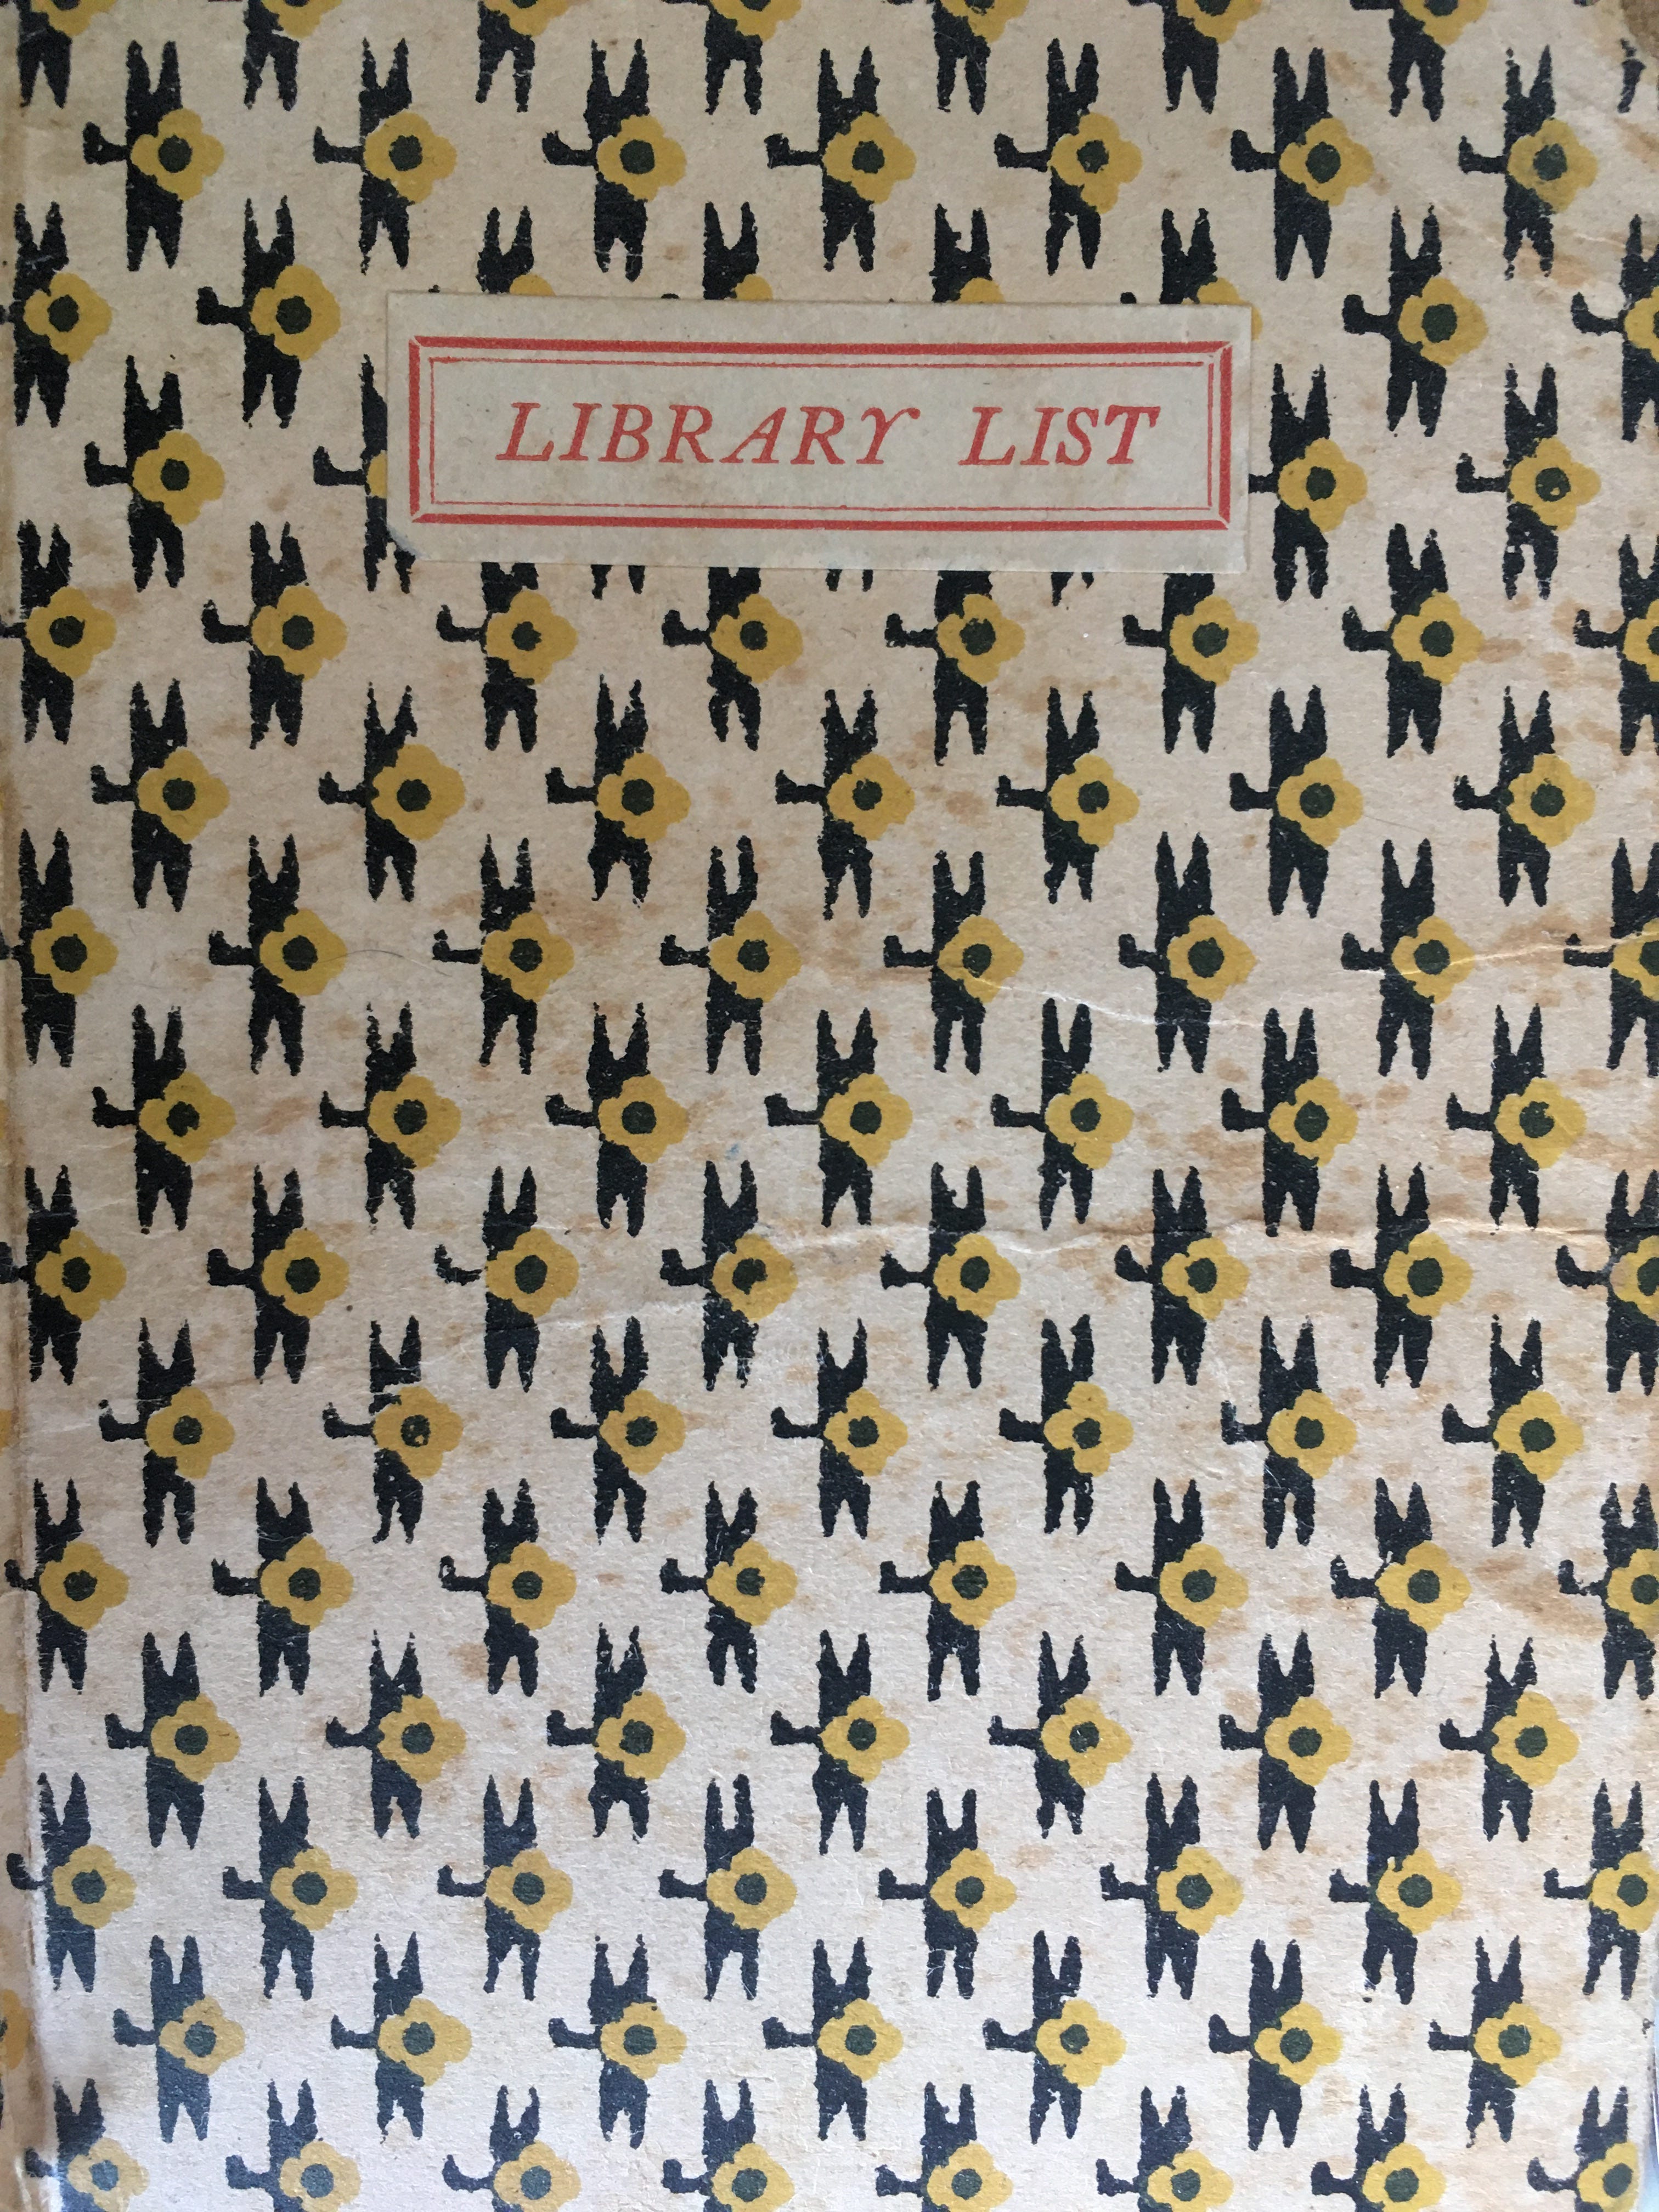 LIBRARY LIST